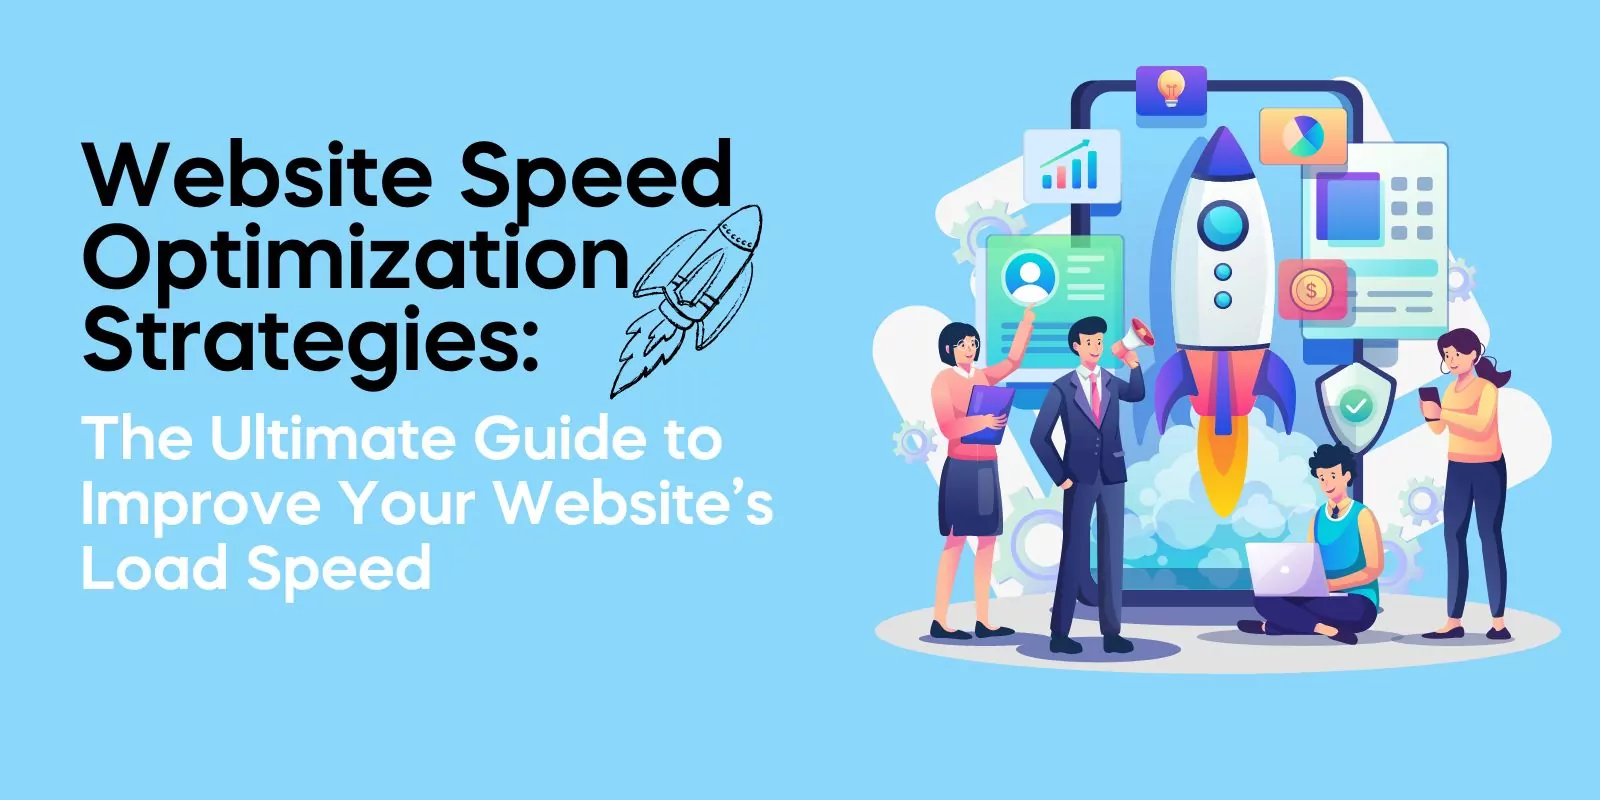 Website Speed Optimization Strategies: The Ultimate Guide to Improve Your Website’s Load Speed